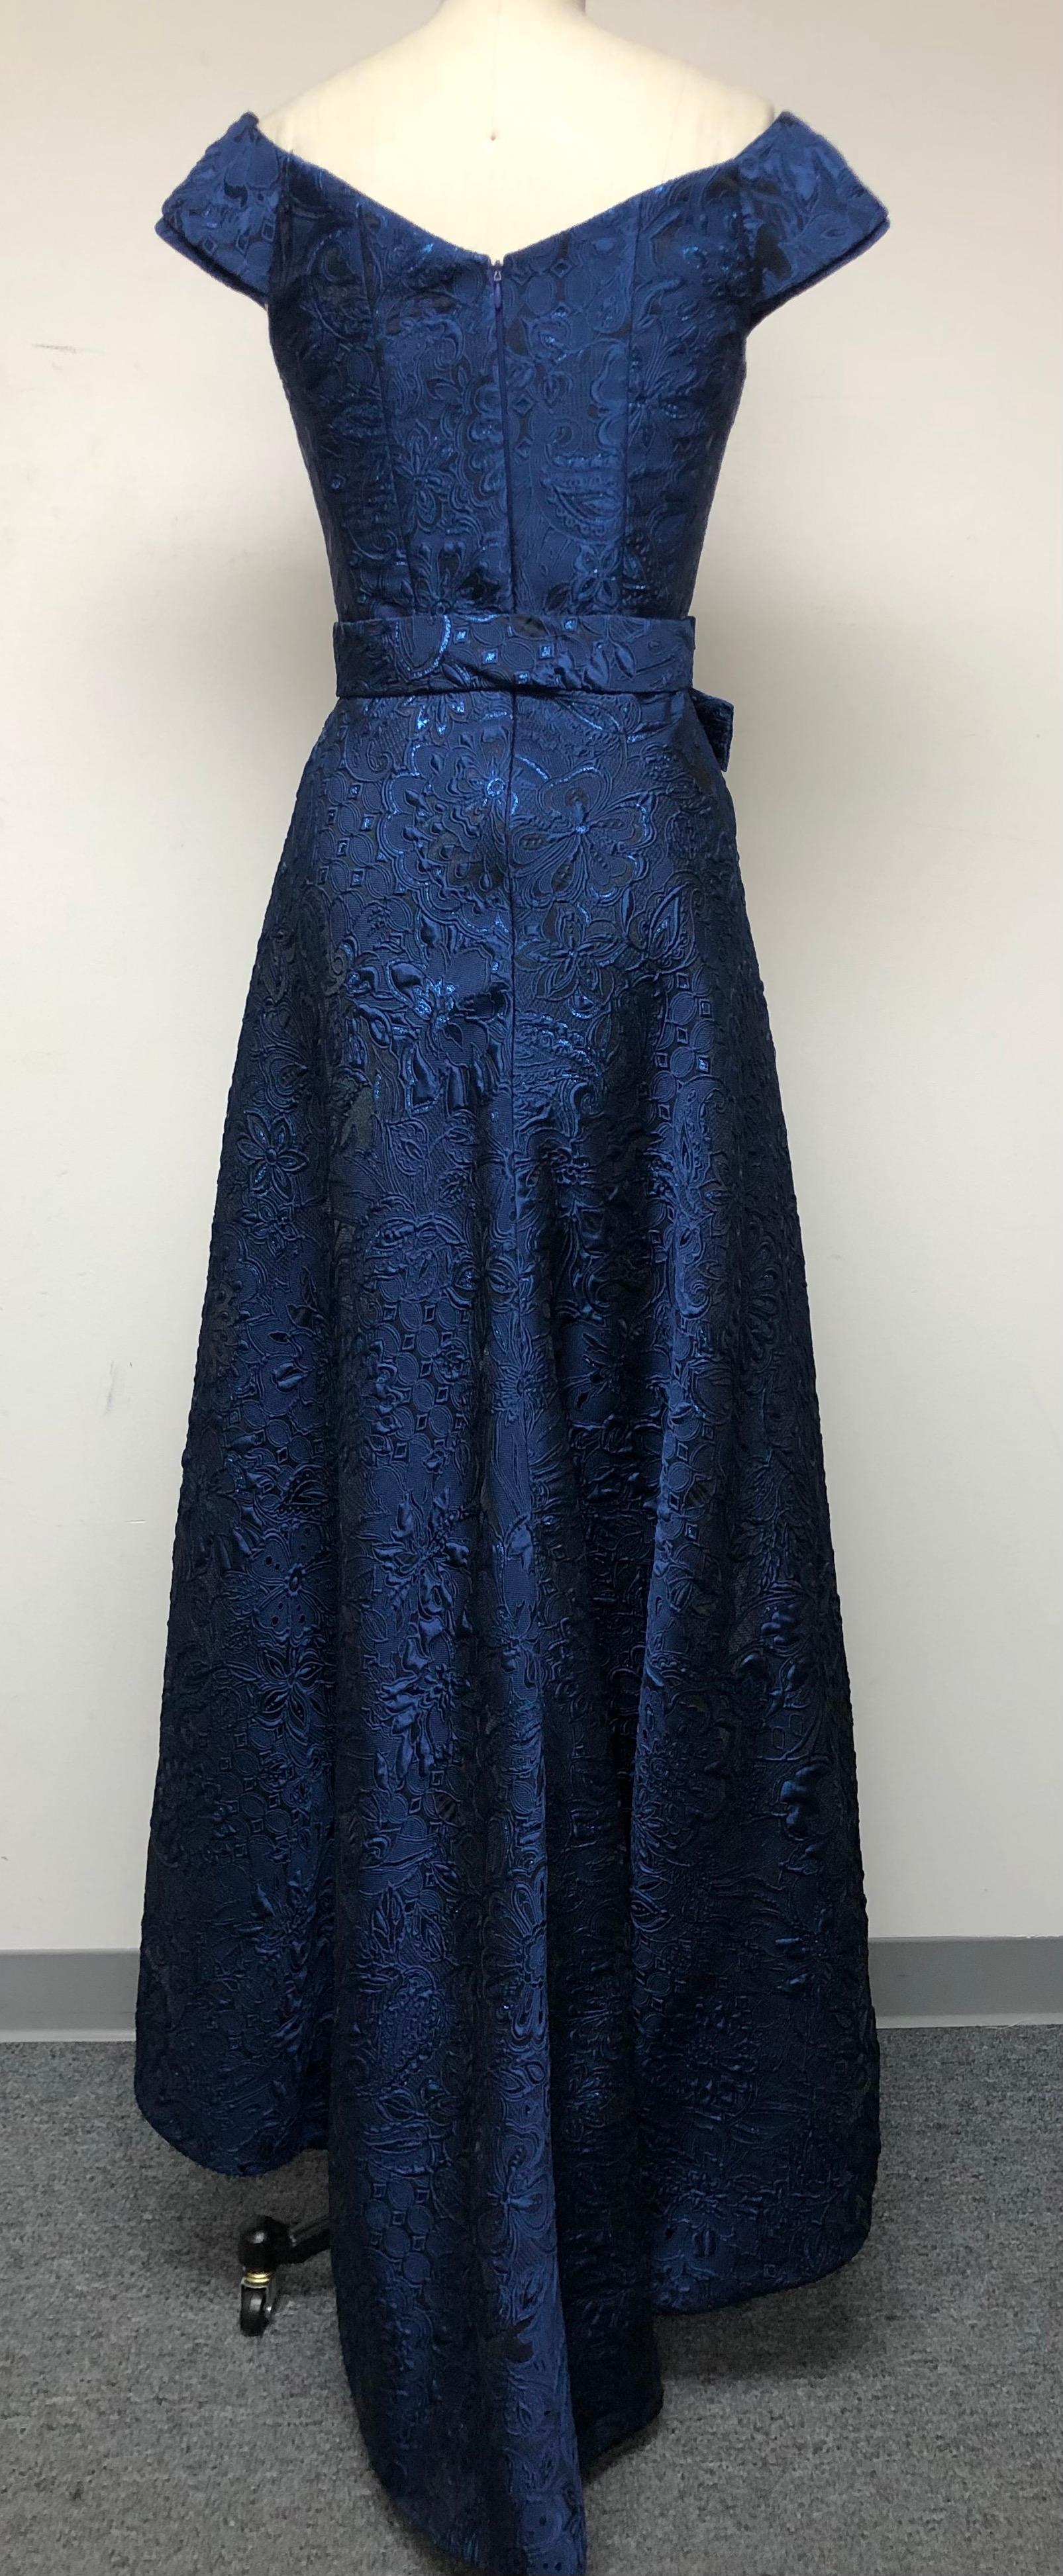 Navy blue portrait V neck fit flare high low gown. Cinched at the waist with self bow belt and chic train. In blue French matelassé with shimmering blue lurex for a bit of sparkle. Holiday dressing at its finest. For a sweeping entrance to parties.